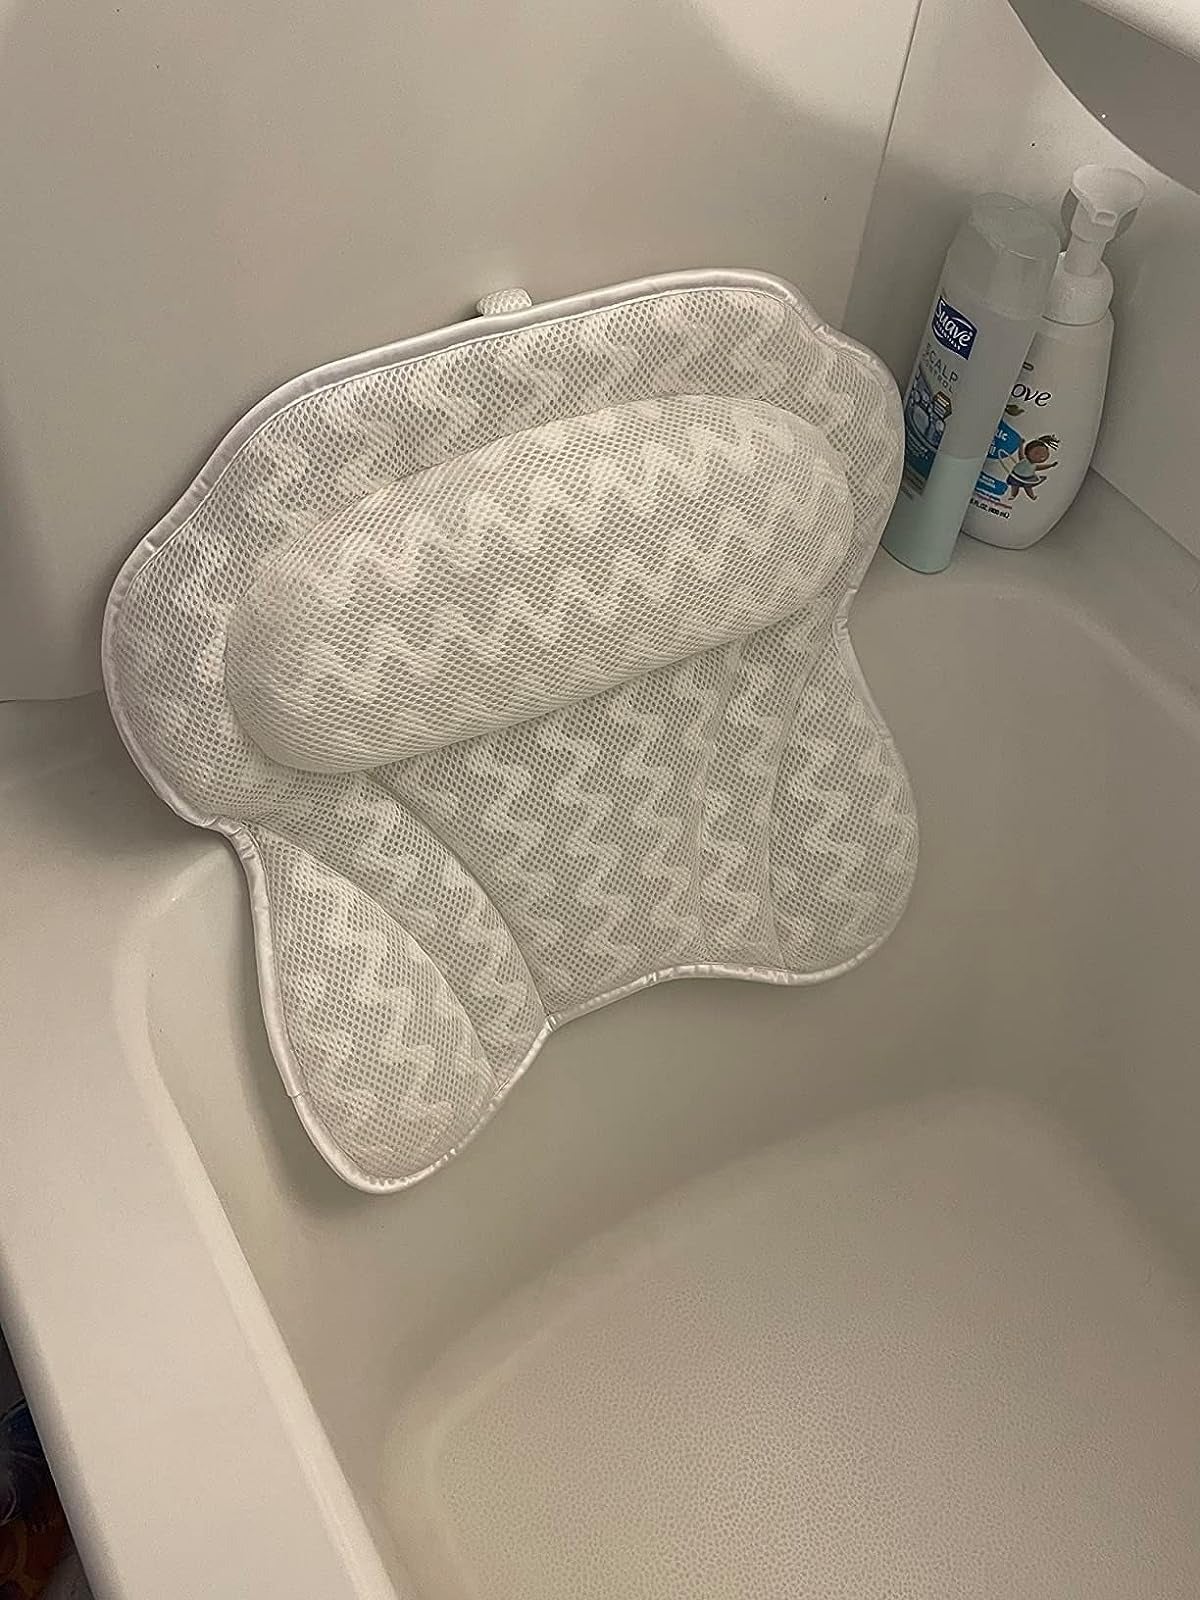 reviewer showing the tub pillow that is attached to the wall with suction cups